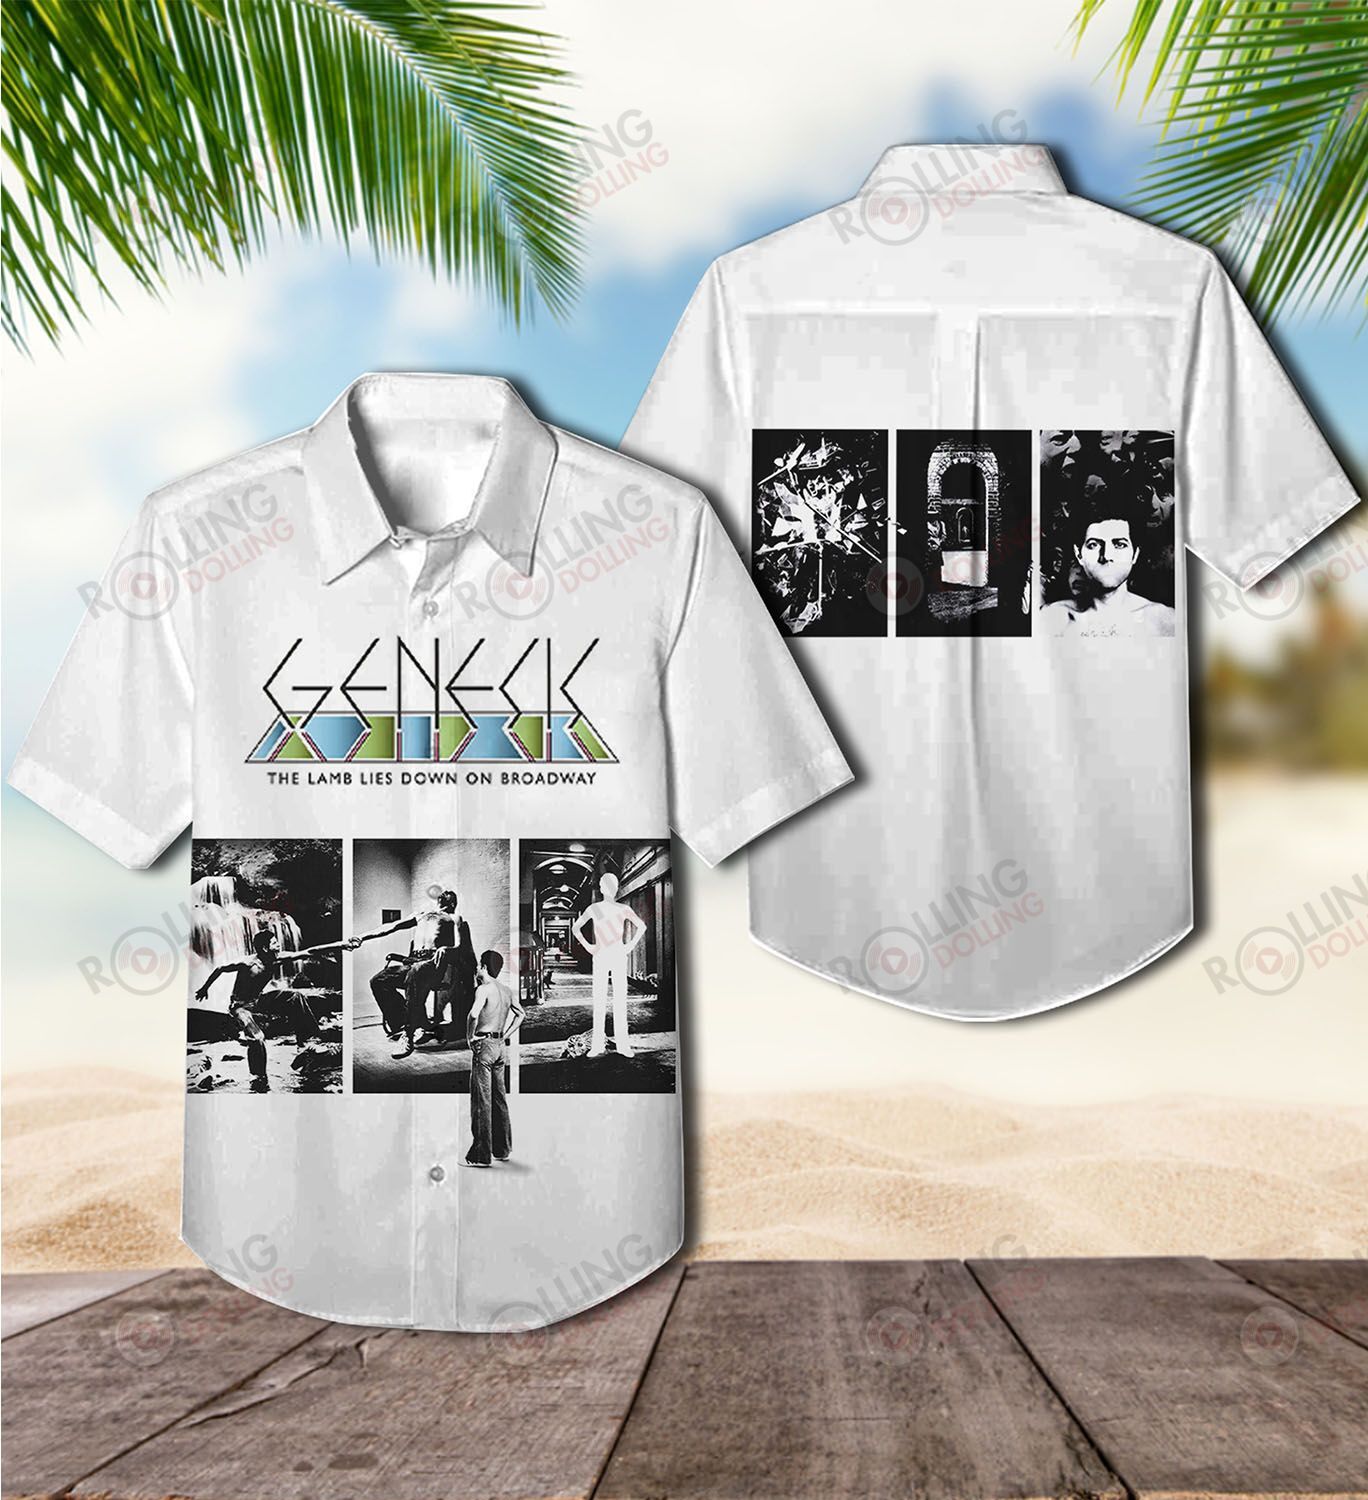 The Hawaiian Shirt is a popular shirt that is worn by Rock band fans 76